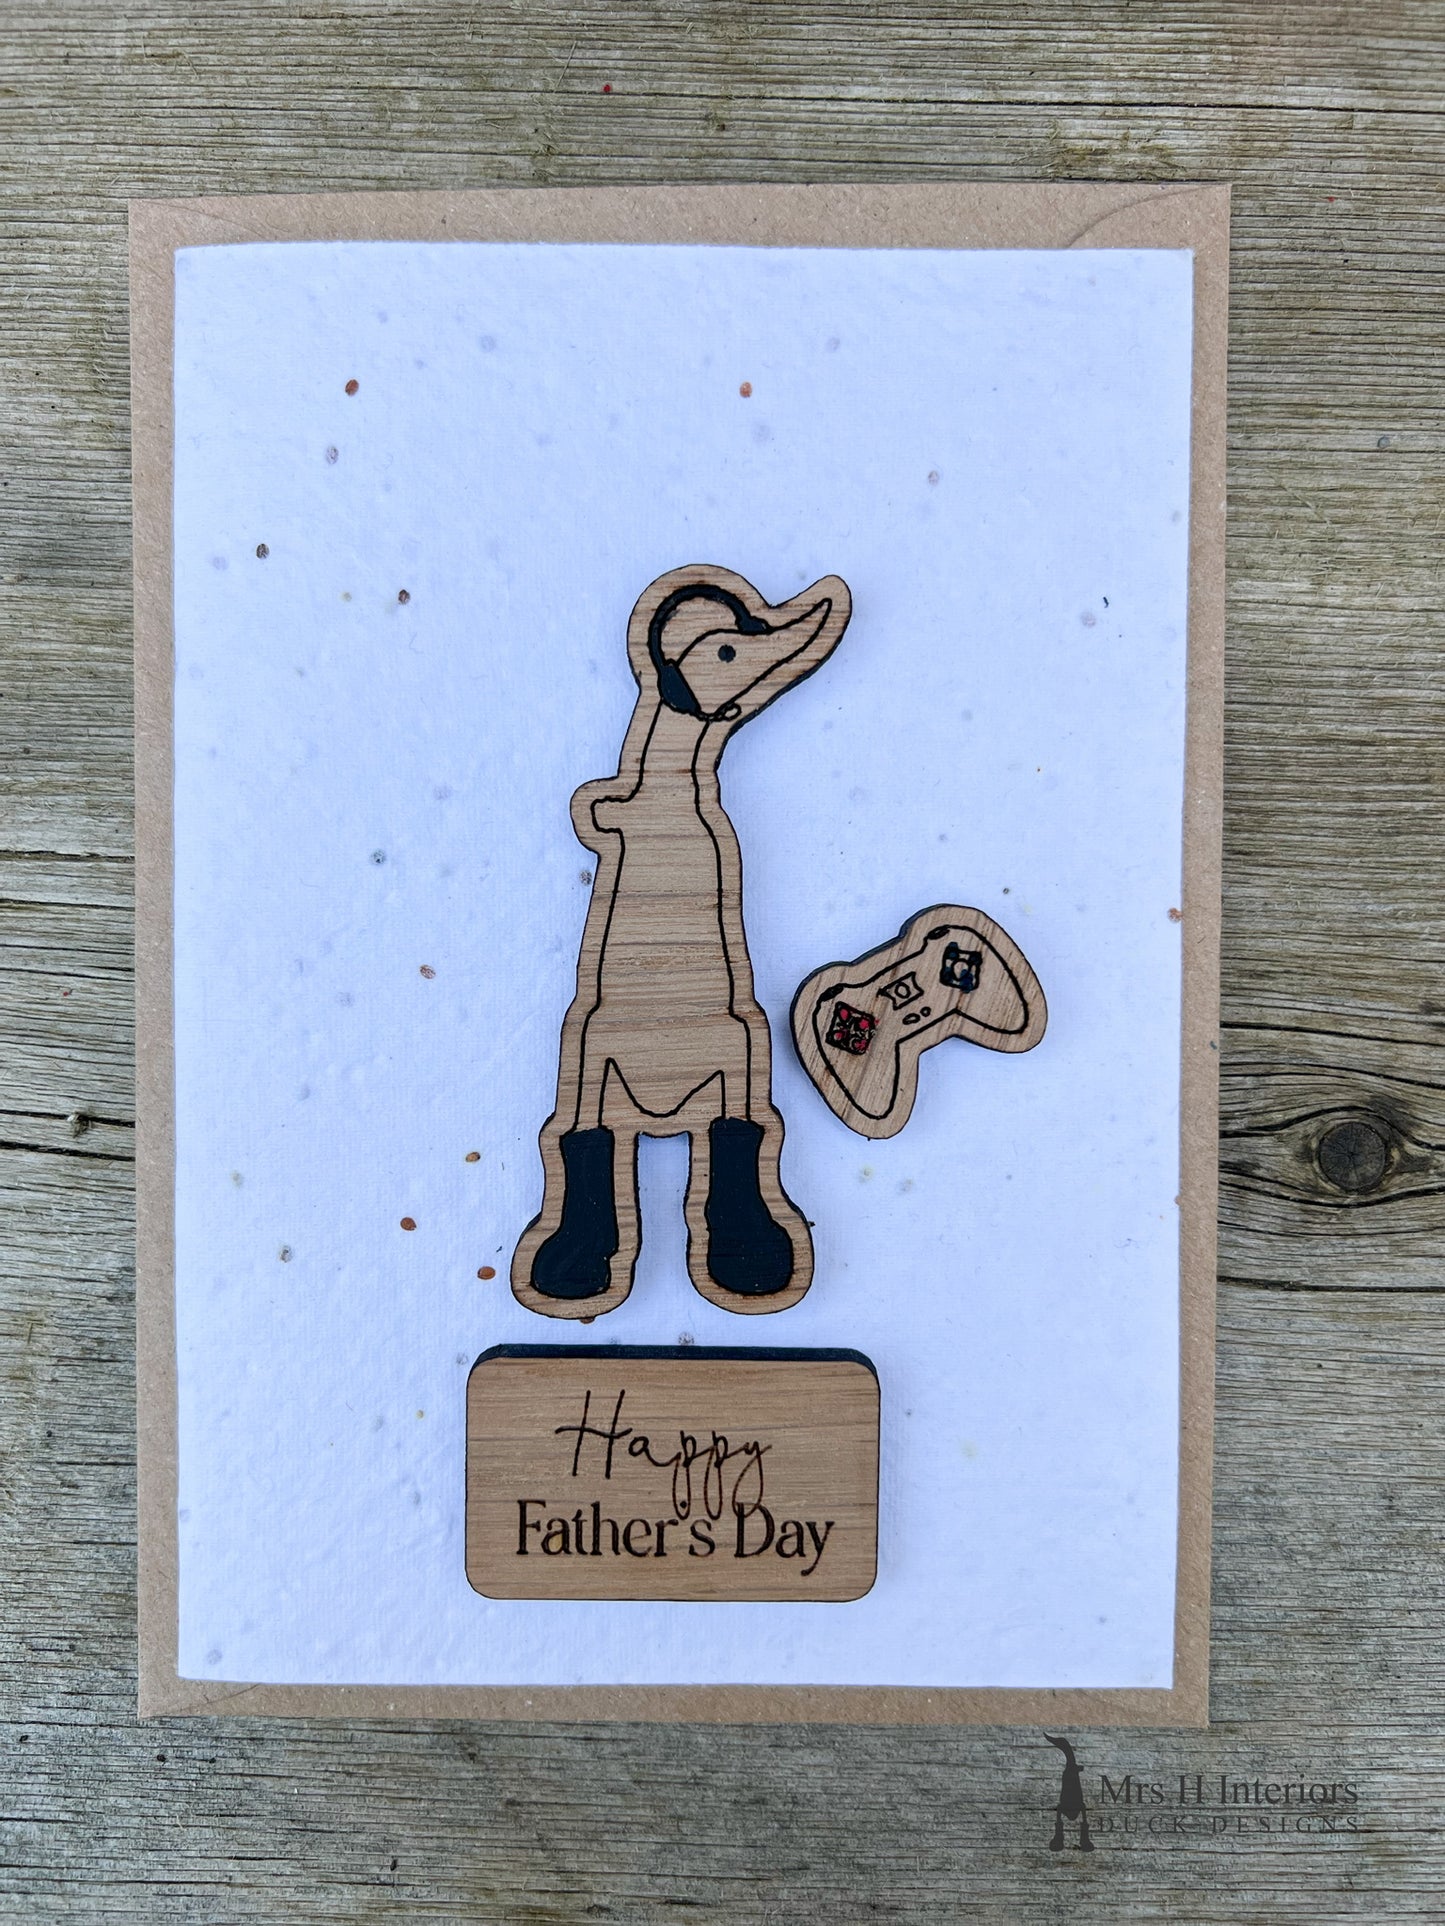 Gaming Duck - Birthday or Father’s Day Card - Decorated Wooden Duck in Boots by Mrs H the Duck Lady